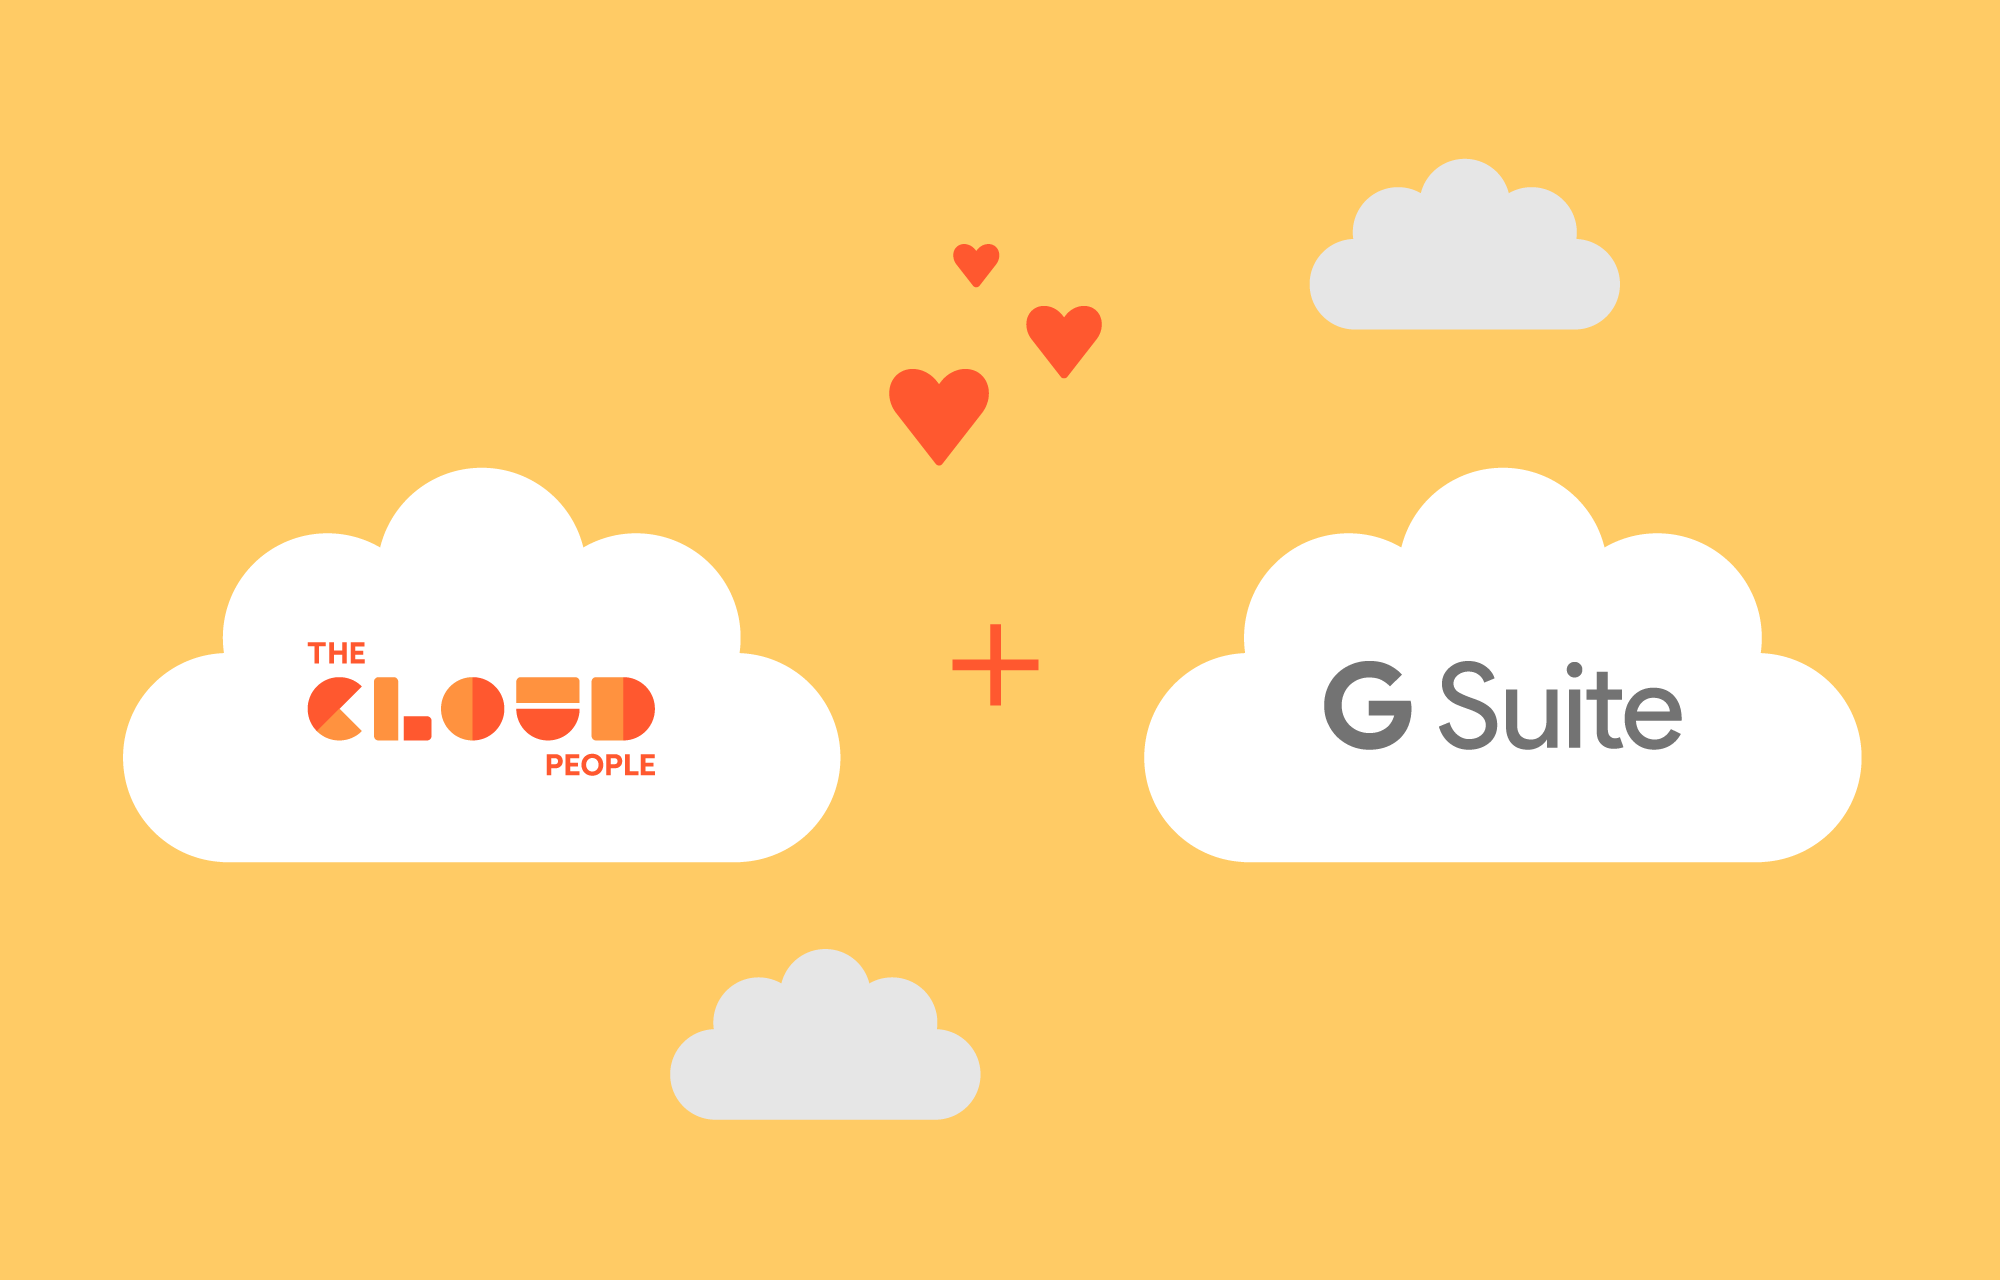 Why should you choose G Suite for your business?